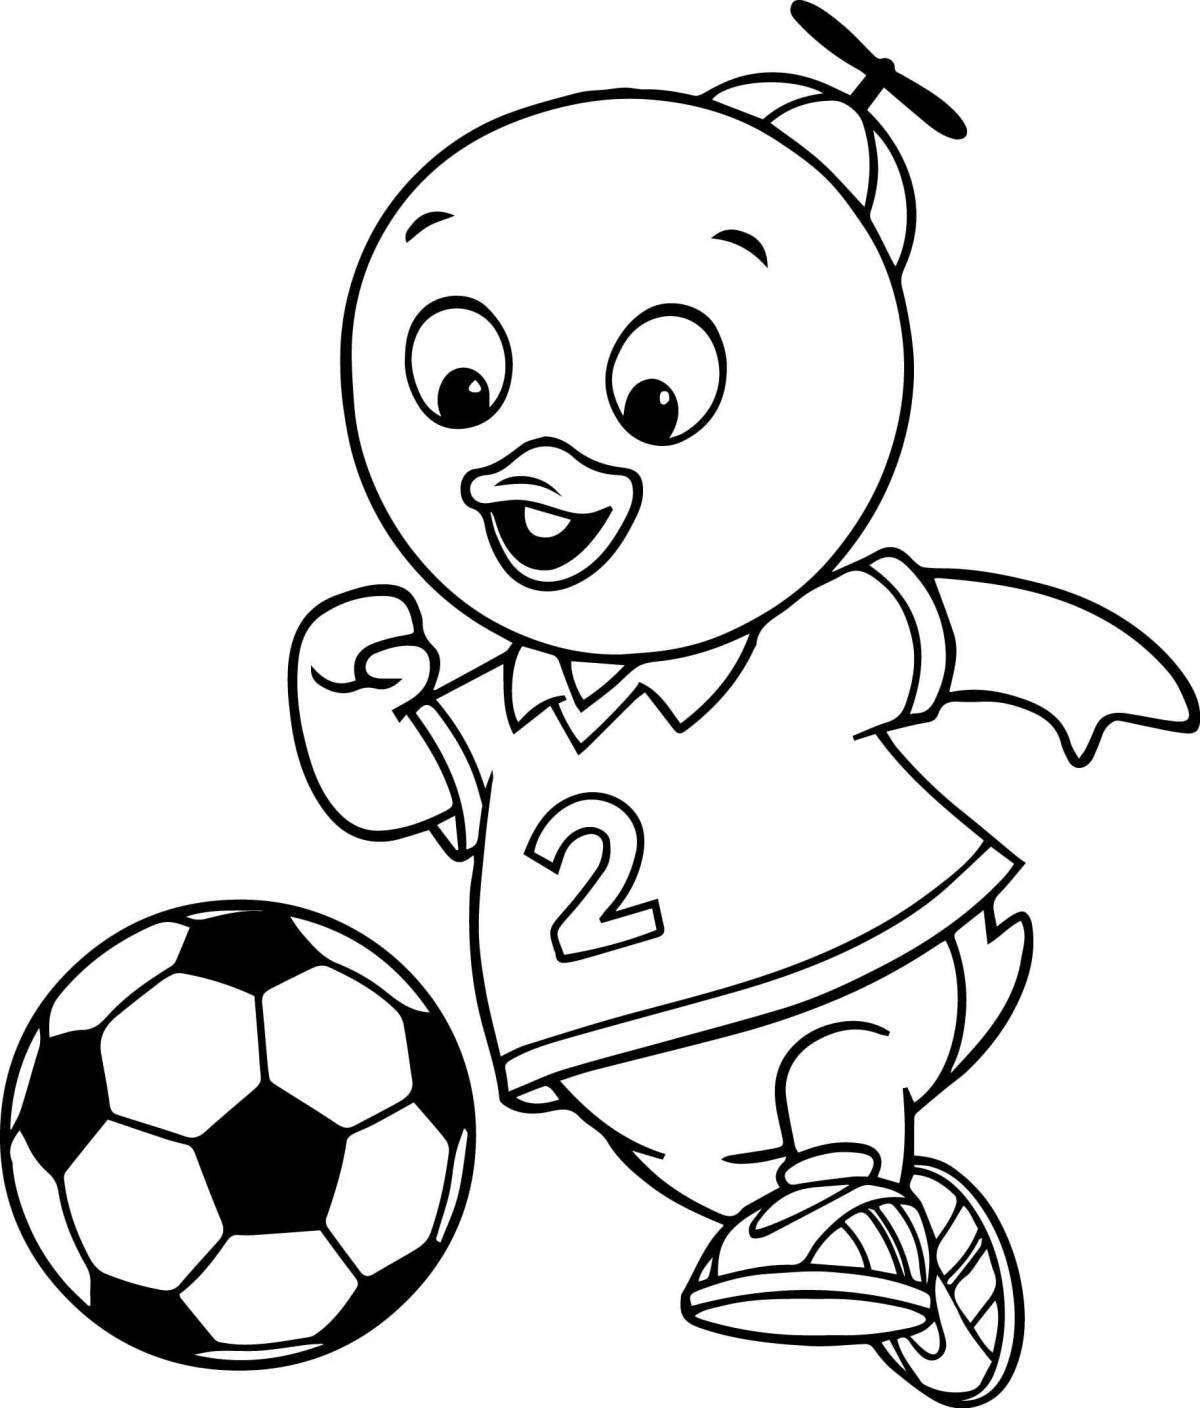 Nice sports coloring book for kids